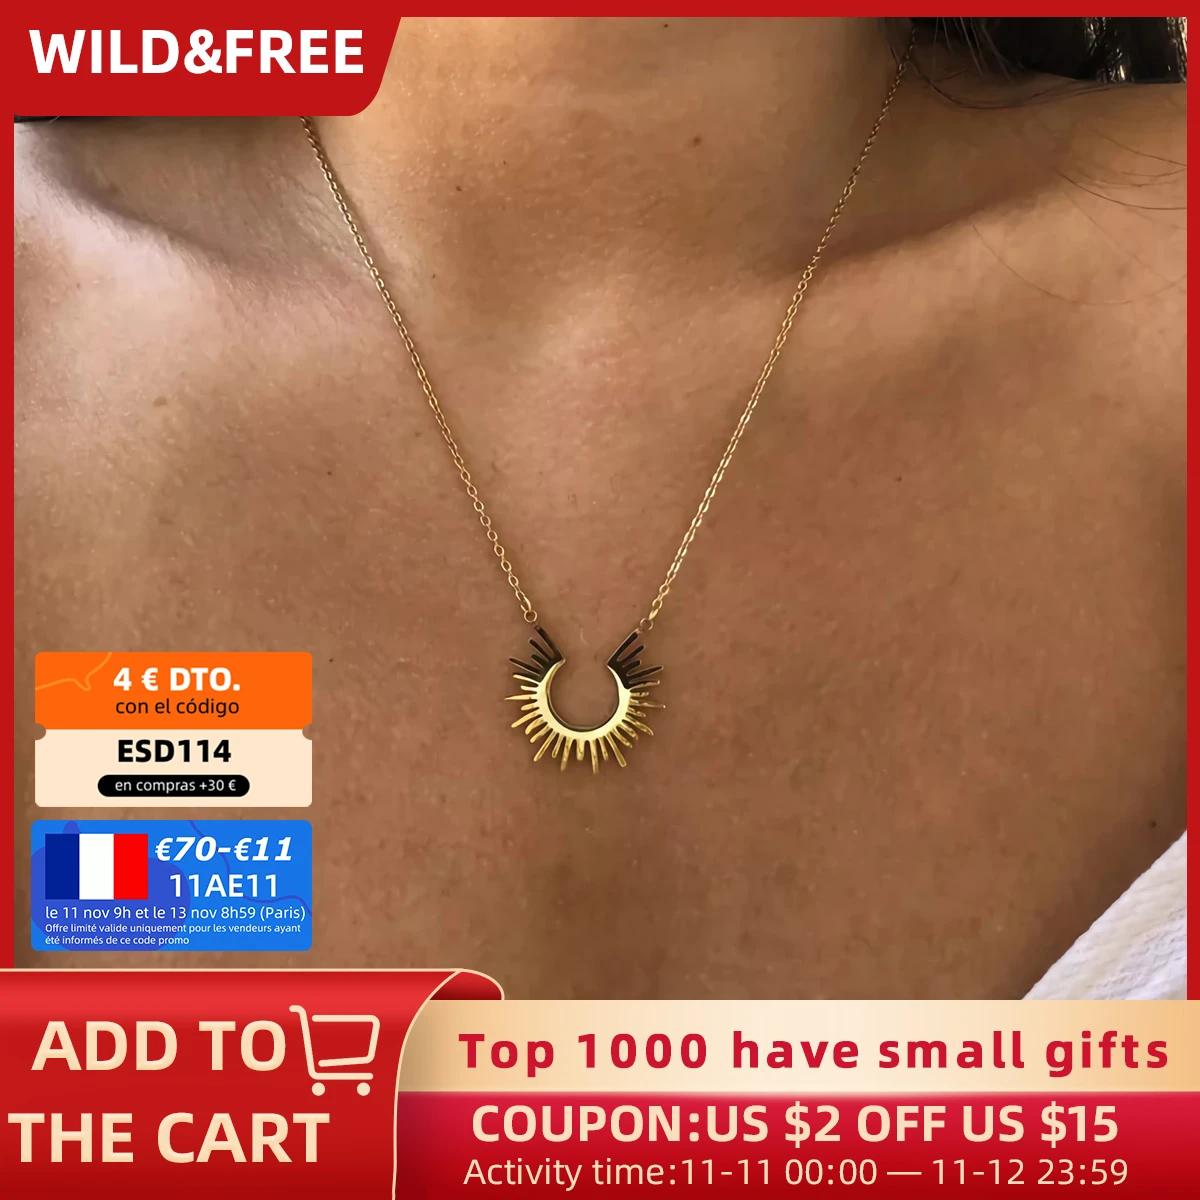 Wild&Free New Stainless Steel Jewelry Geometric Pendant Necklace For Women Gold Half Circle Spiked Femme Colar Choker Necklaces